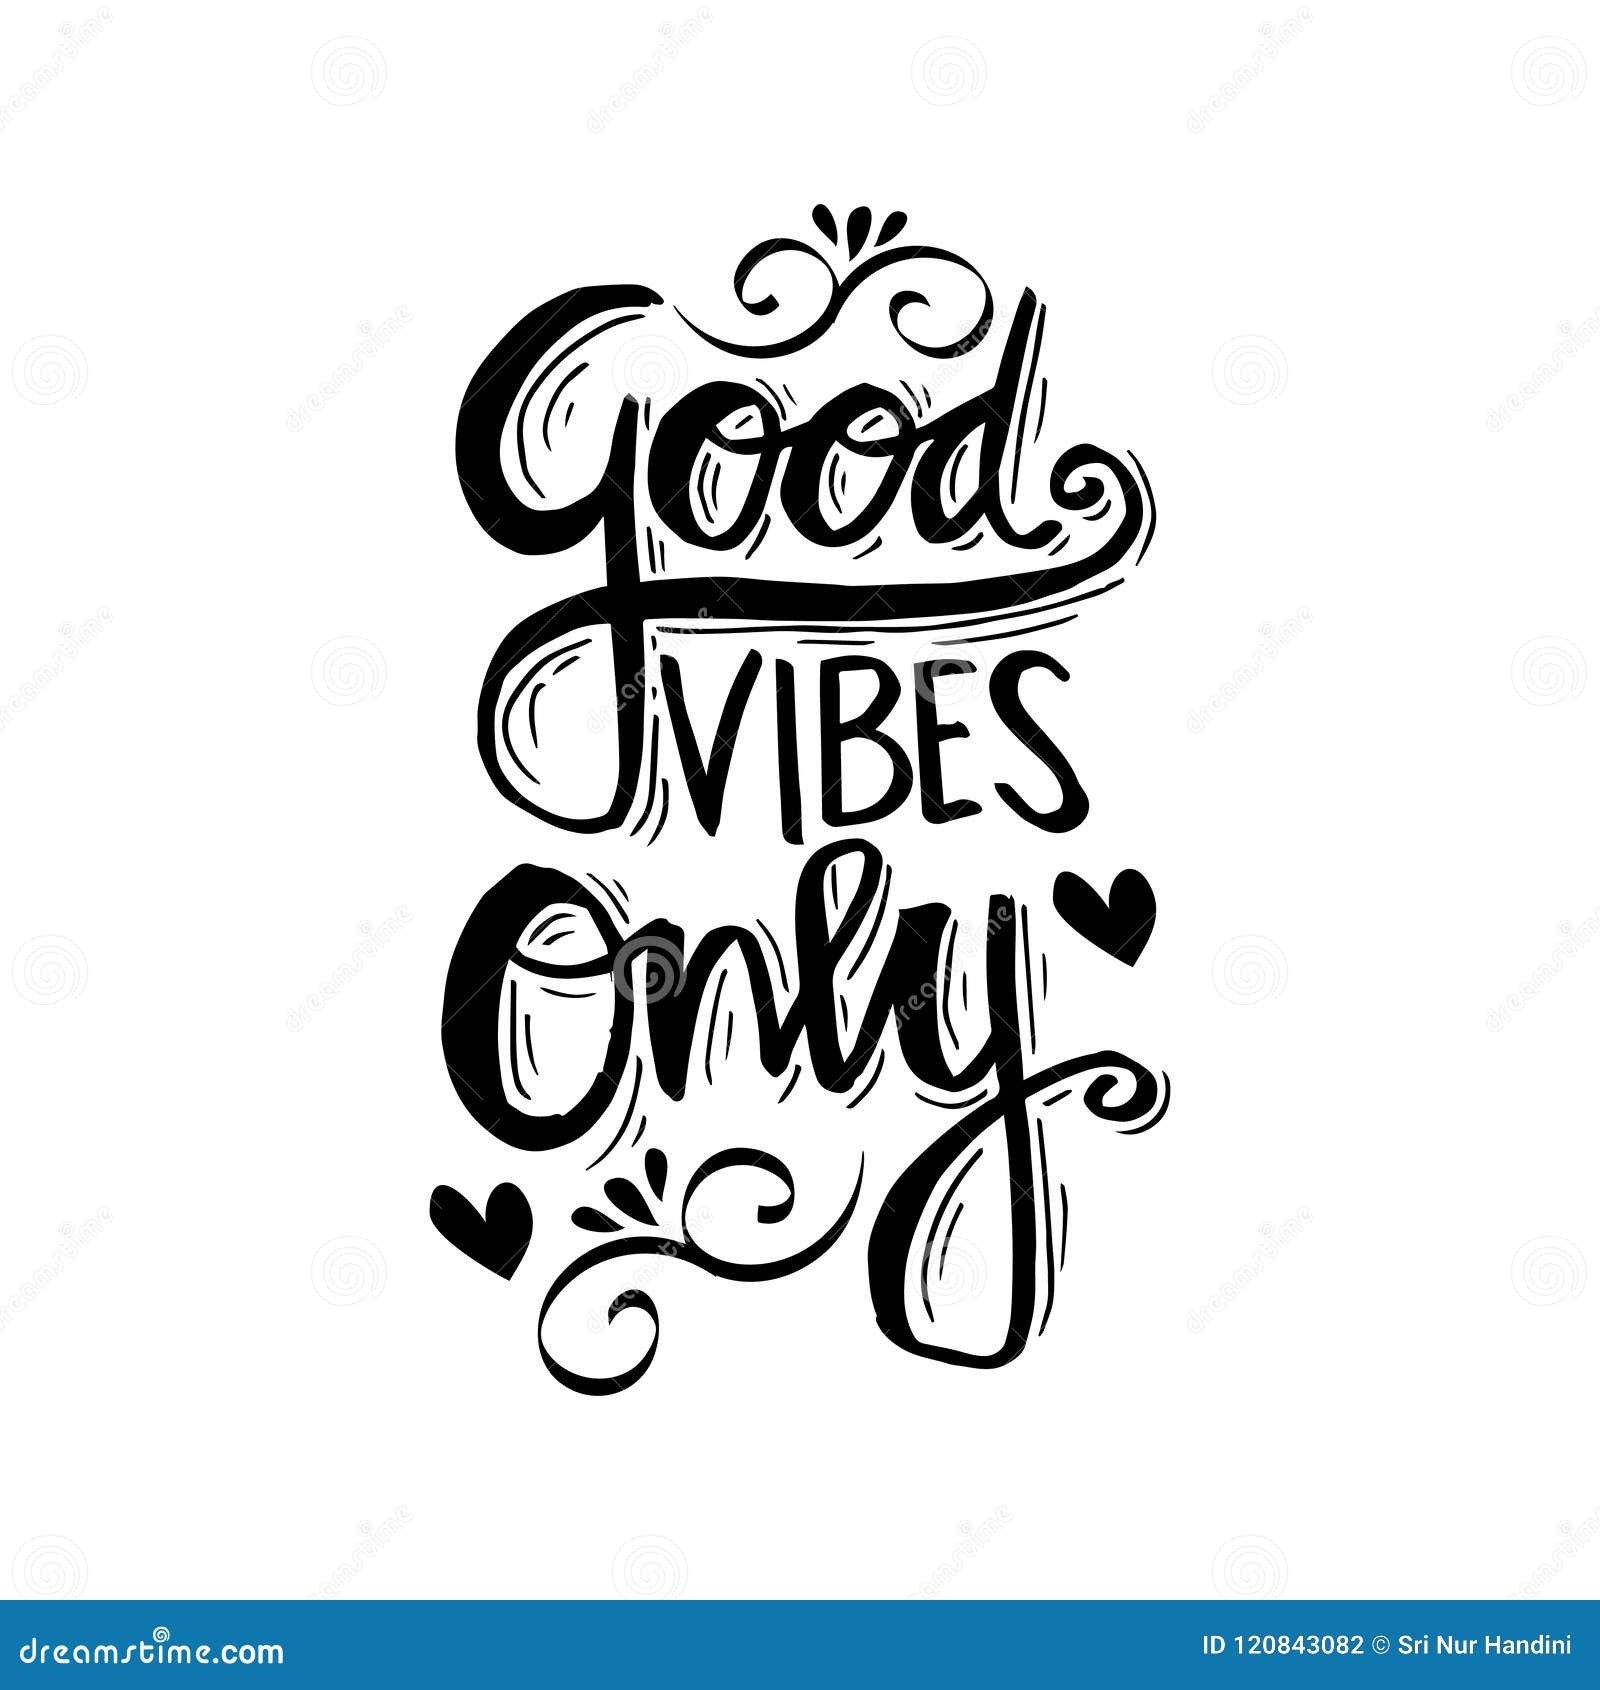 Good Vibes Only Poster Design for Your Home  anjapirchercom